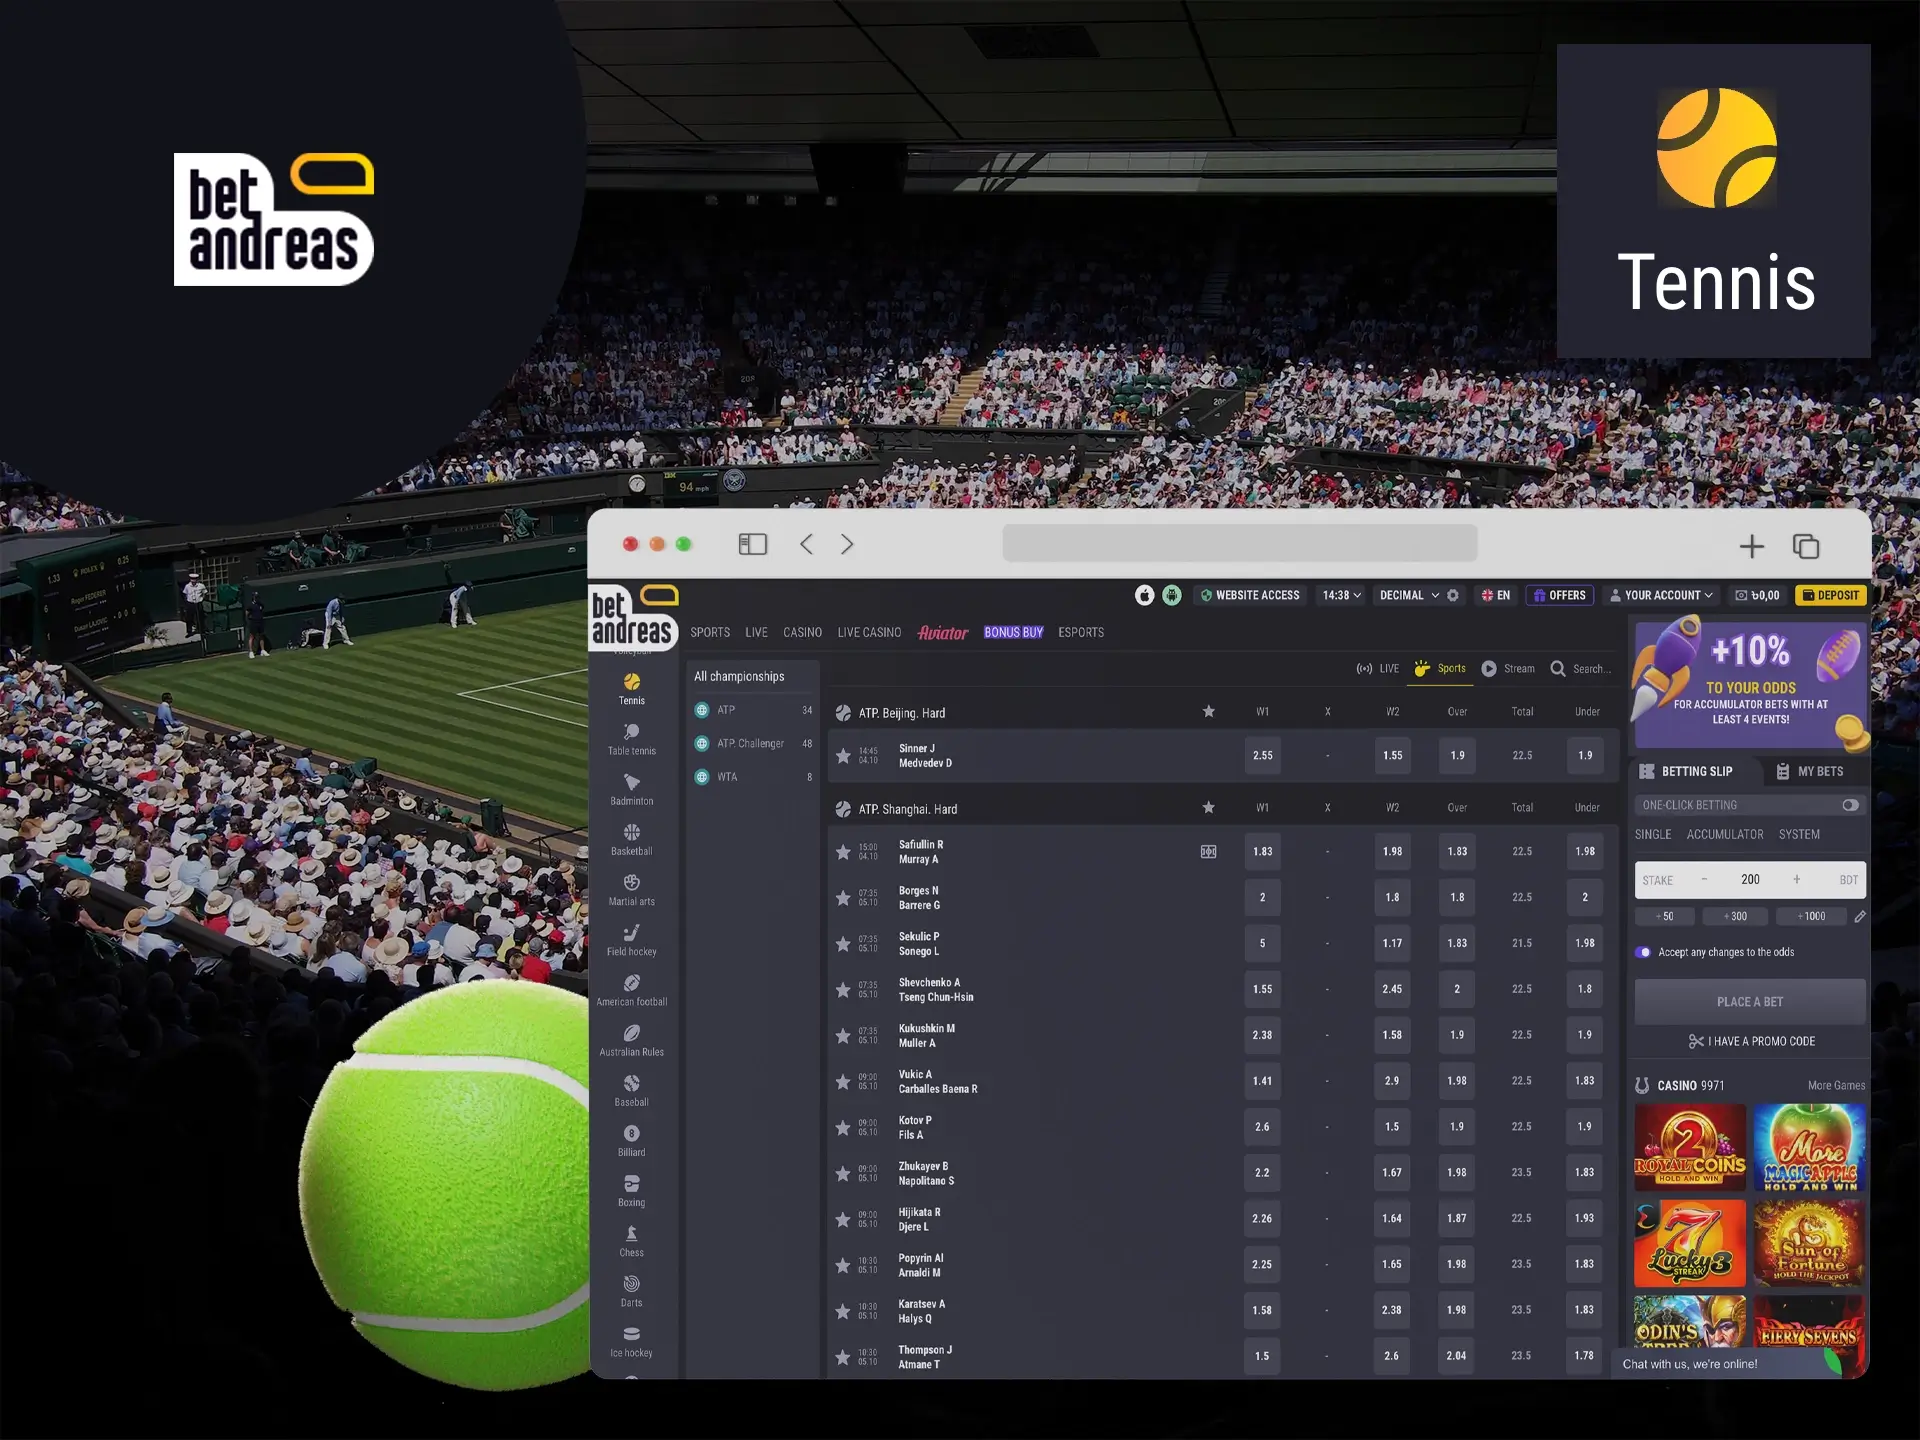 Games with some of the biggest names in tennis are featured on BetAndreas.